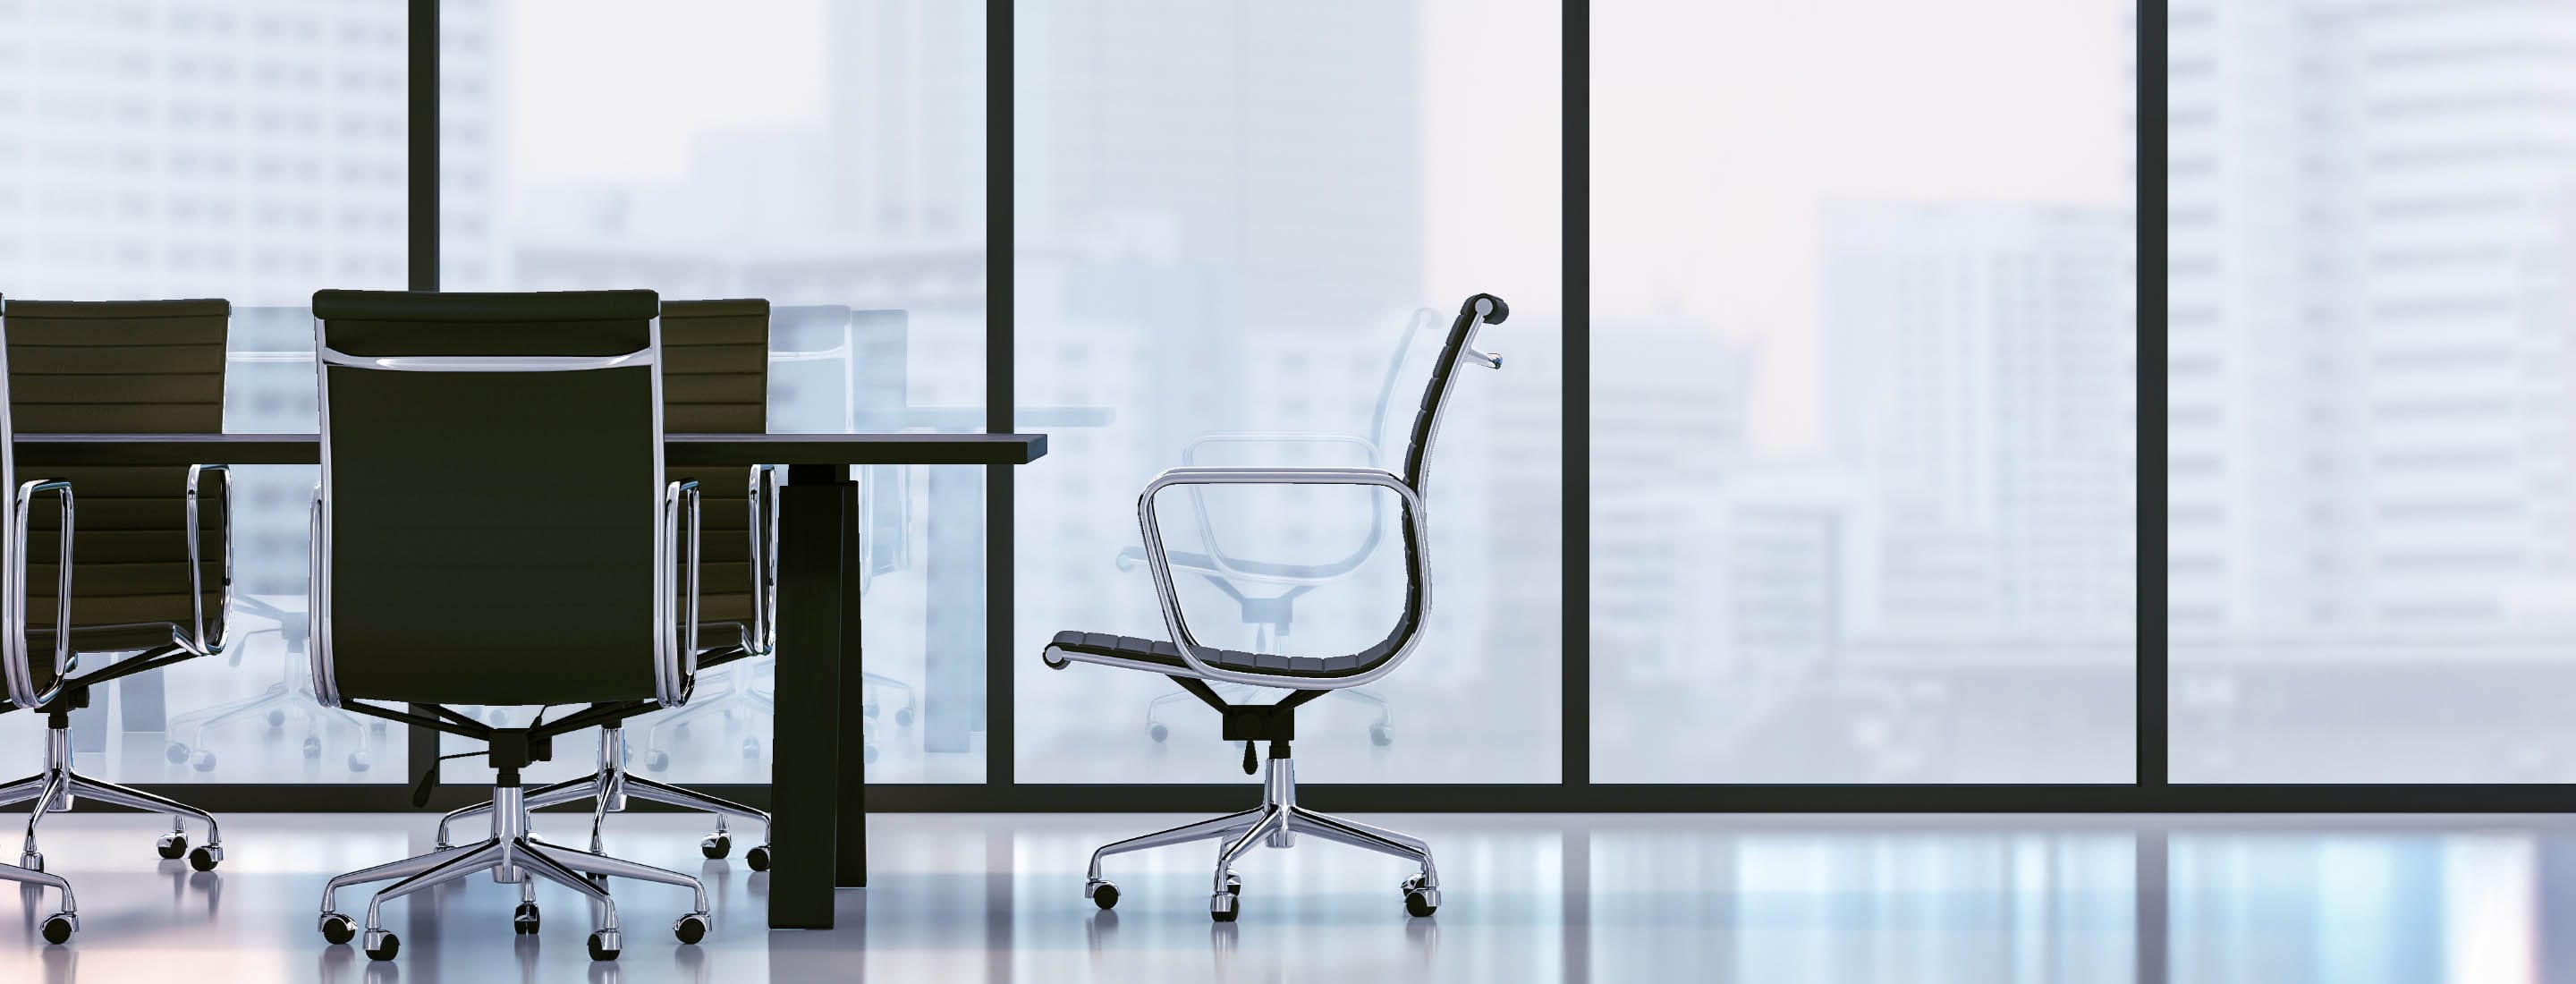 Professional Liability Banner - conference room with chairs looking over high rises